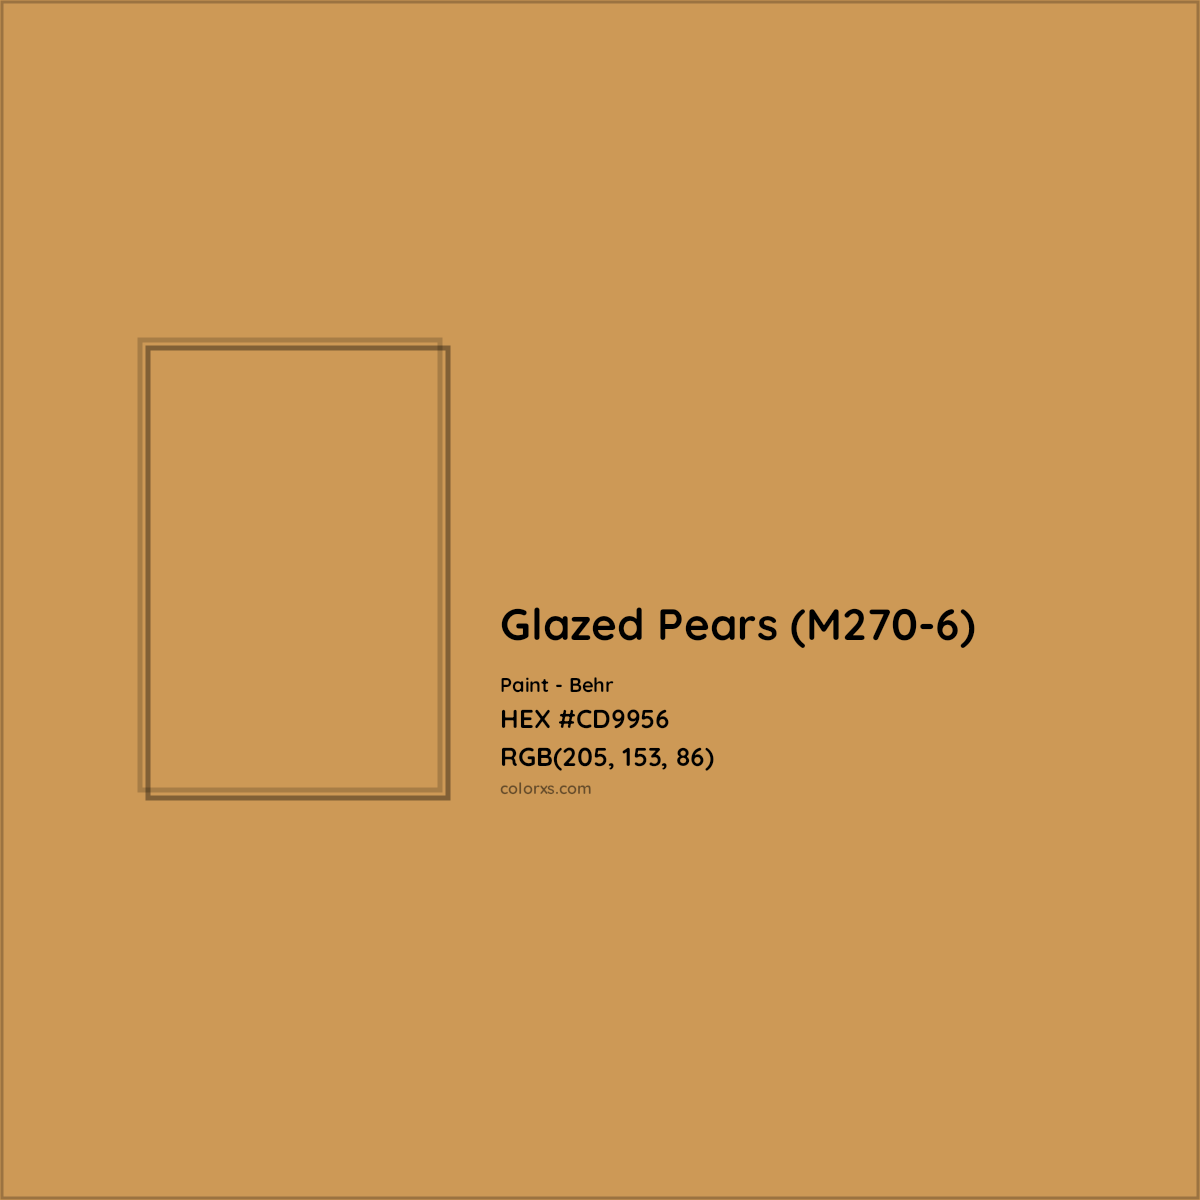 HEX #CD9956 Glazed Pears (M270-6) Paint Behr - Color Code